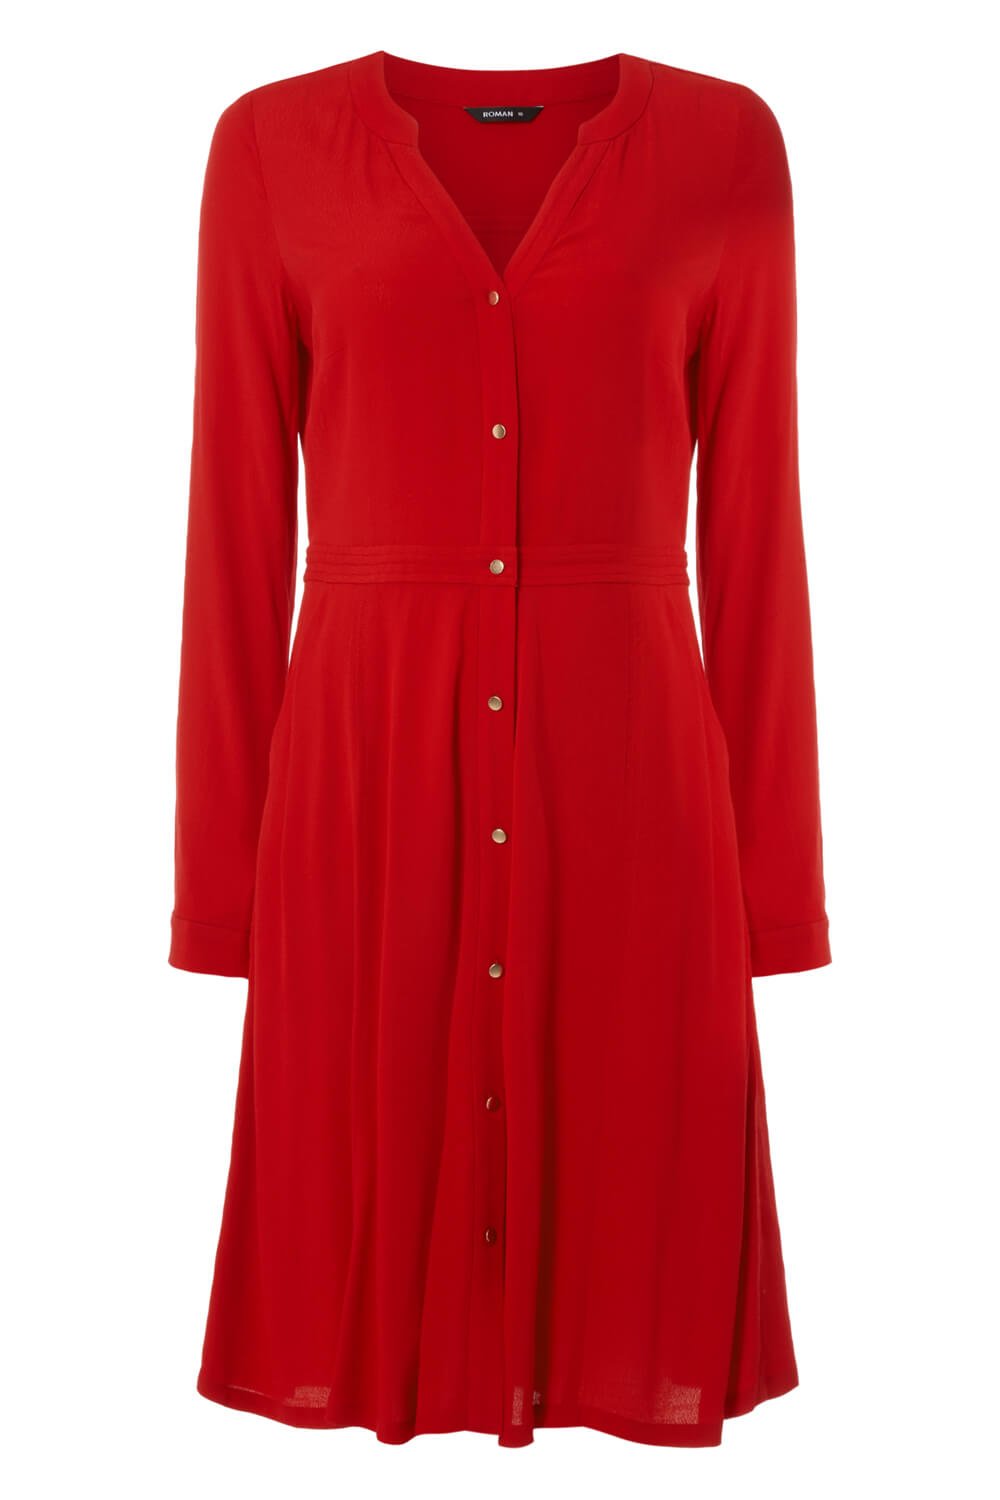 Red Fit and Flare Shirt Dress, Image 4 of 4